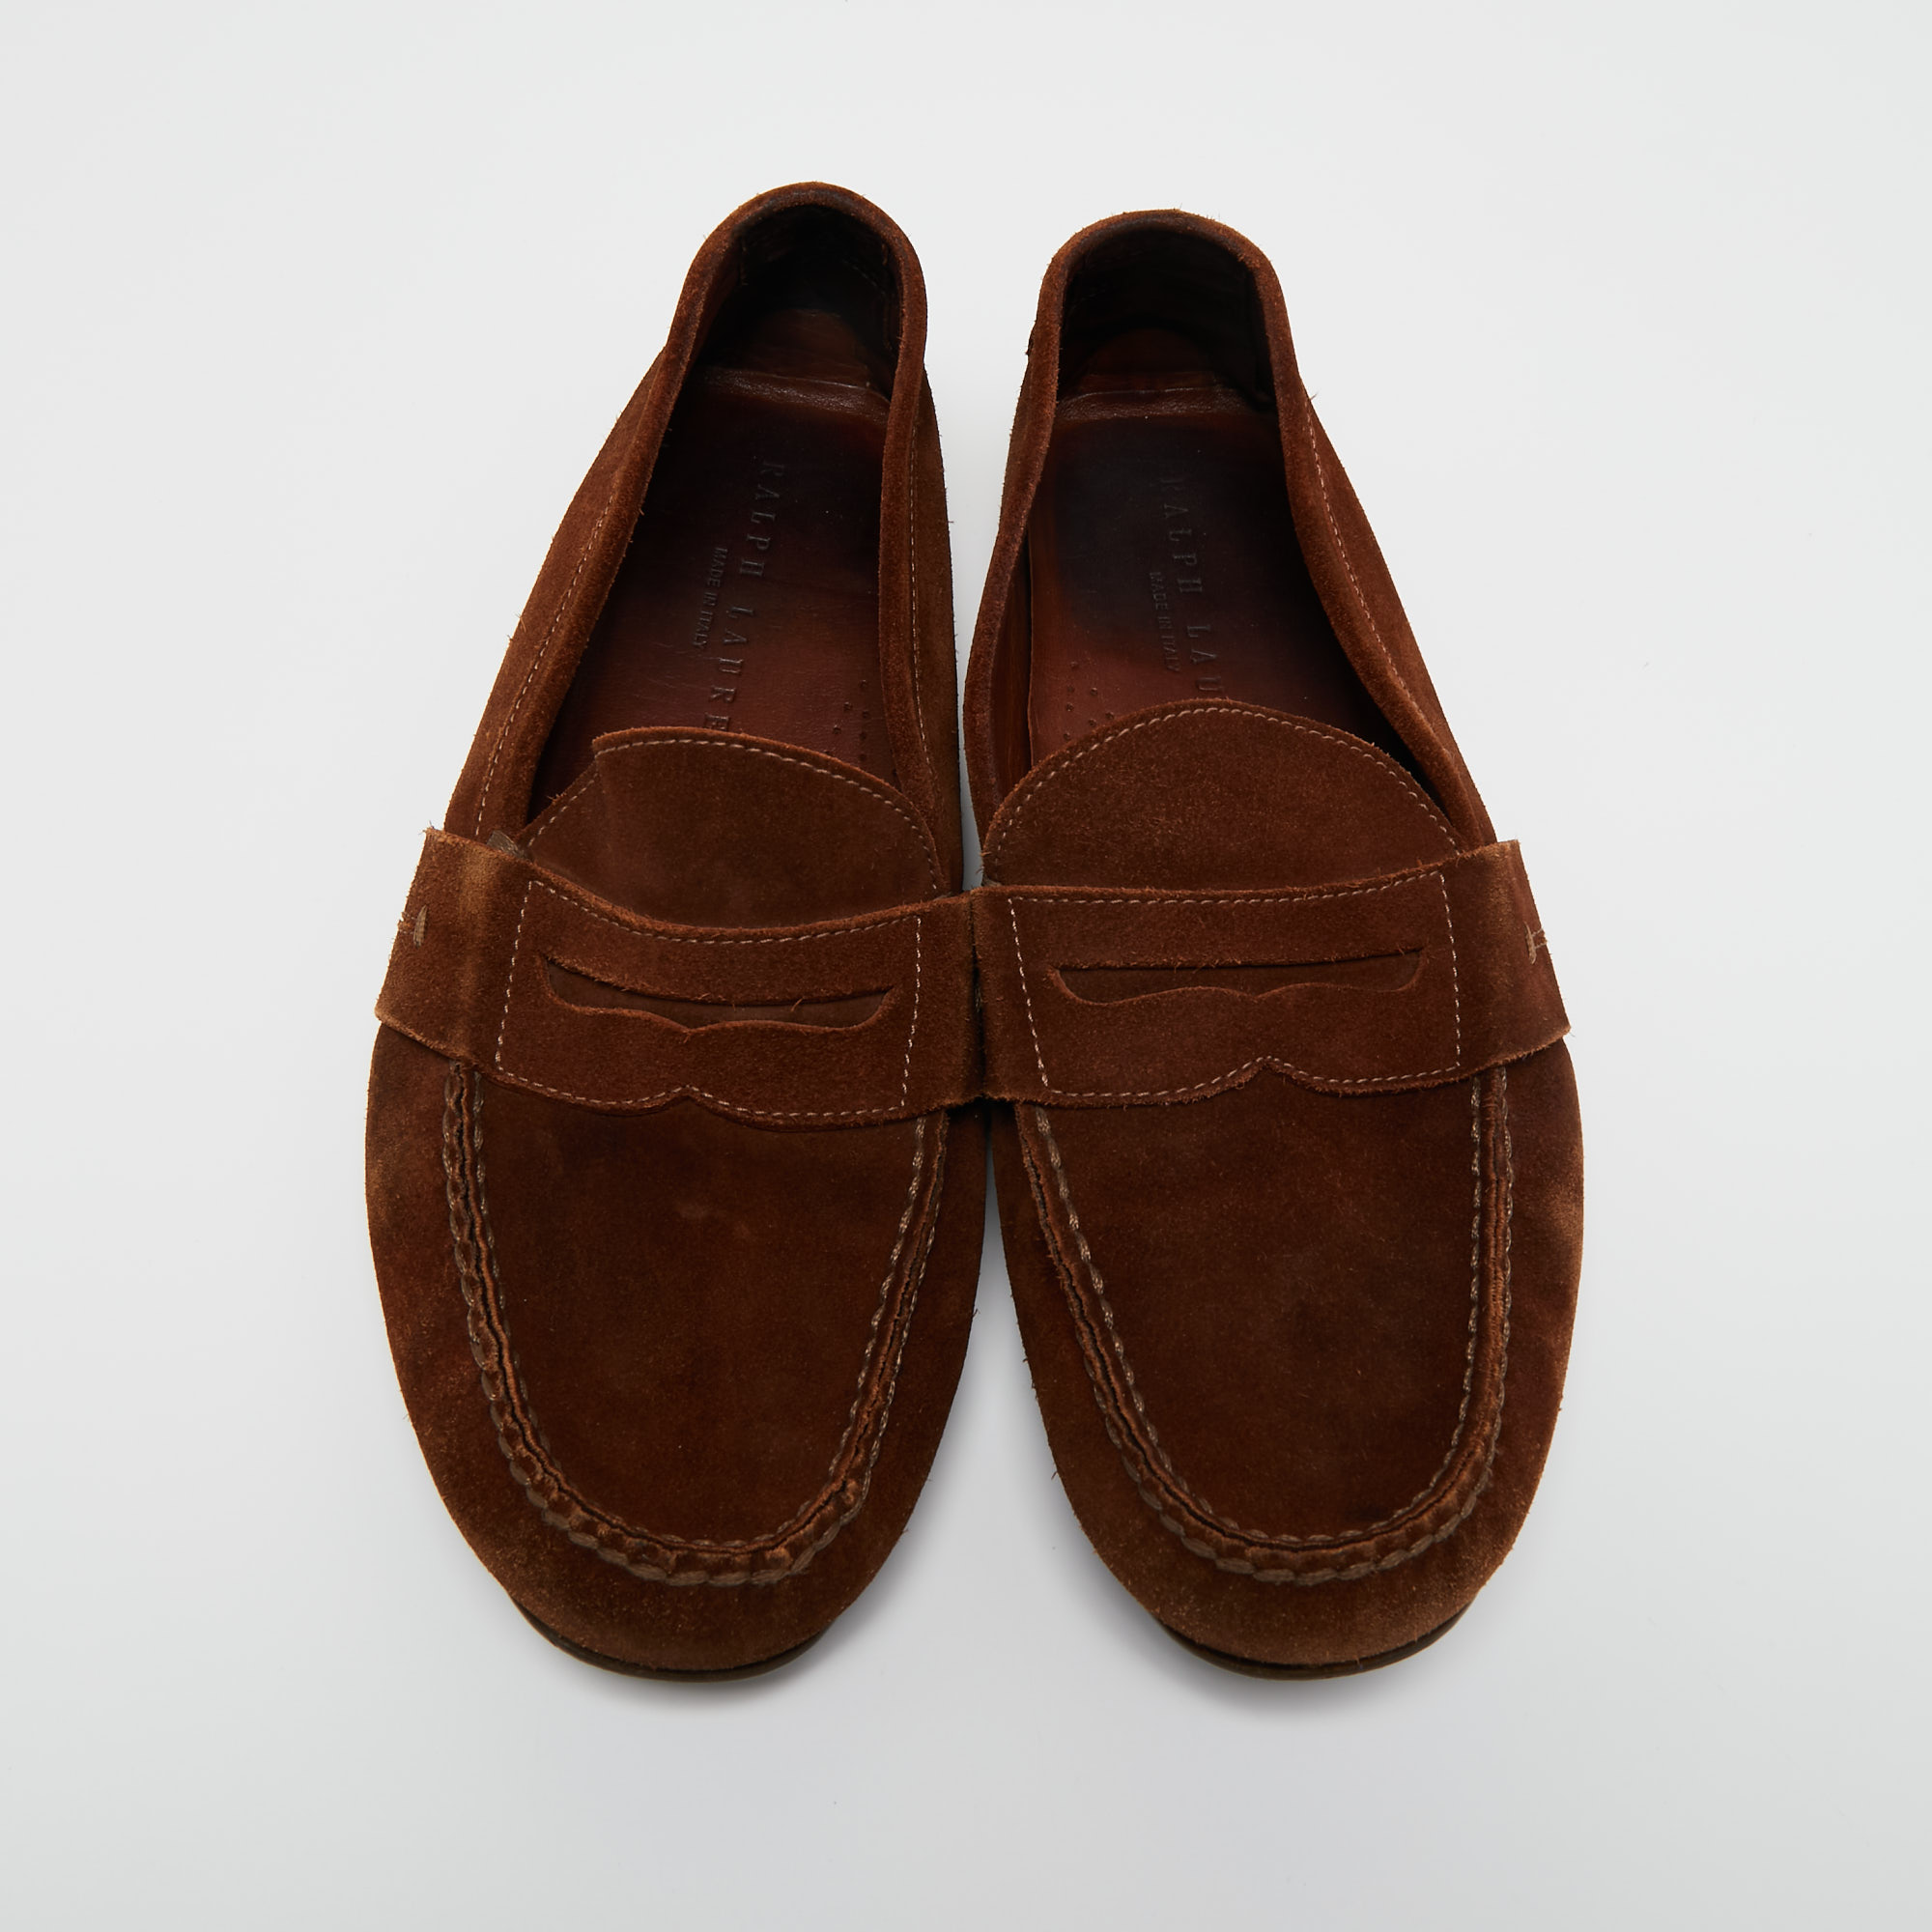 Ralph Lauren Brown Suede Penny Loafers Size 44